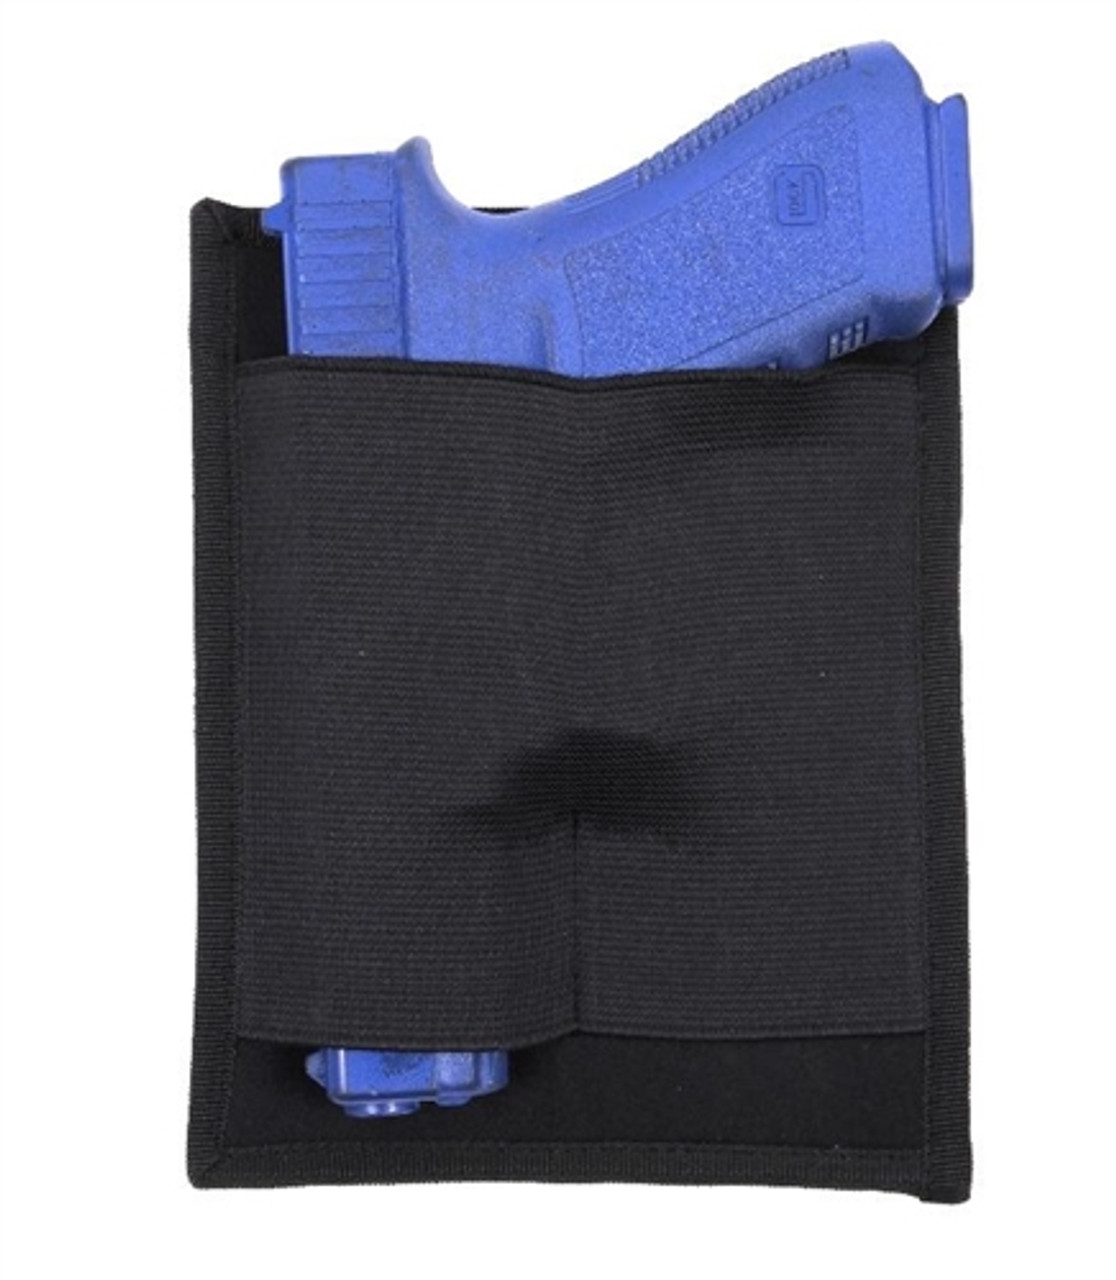 Concealed Carry Holster Panel from Hessen Militaria